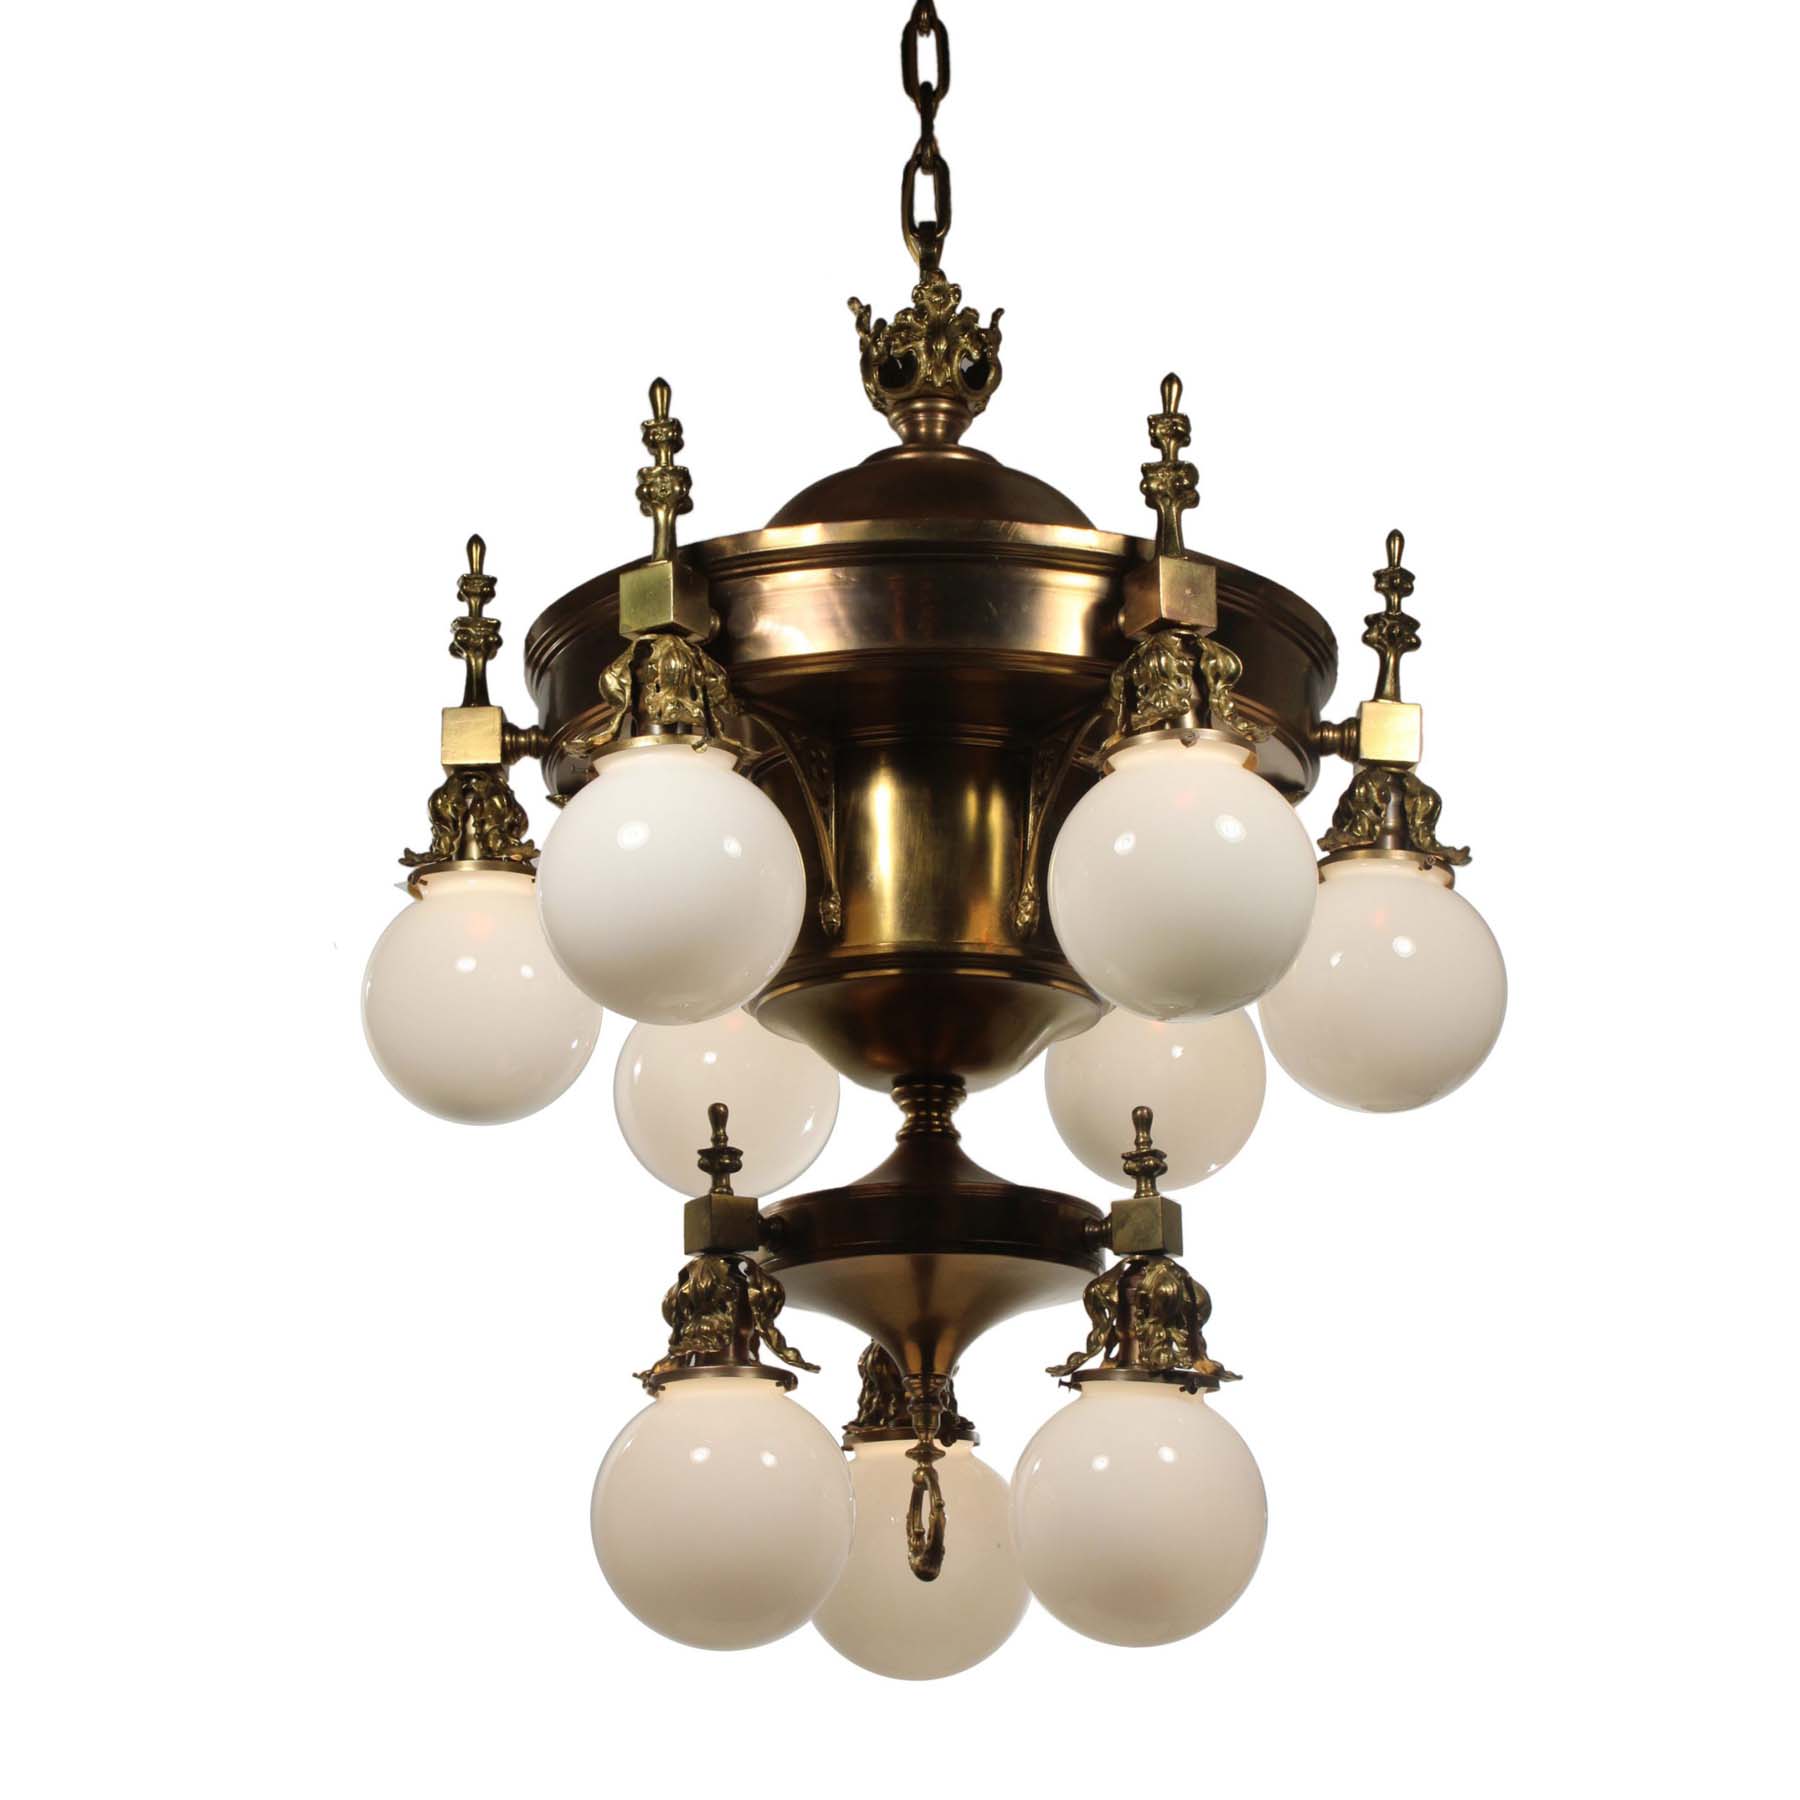 SOLD Substantial Antique Brass Chandelier with Ball Shades-0